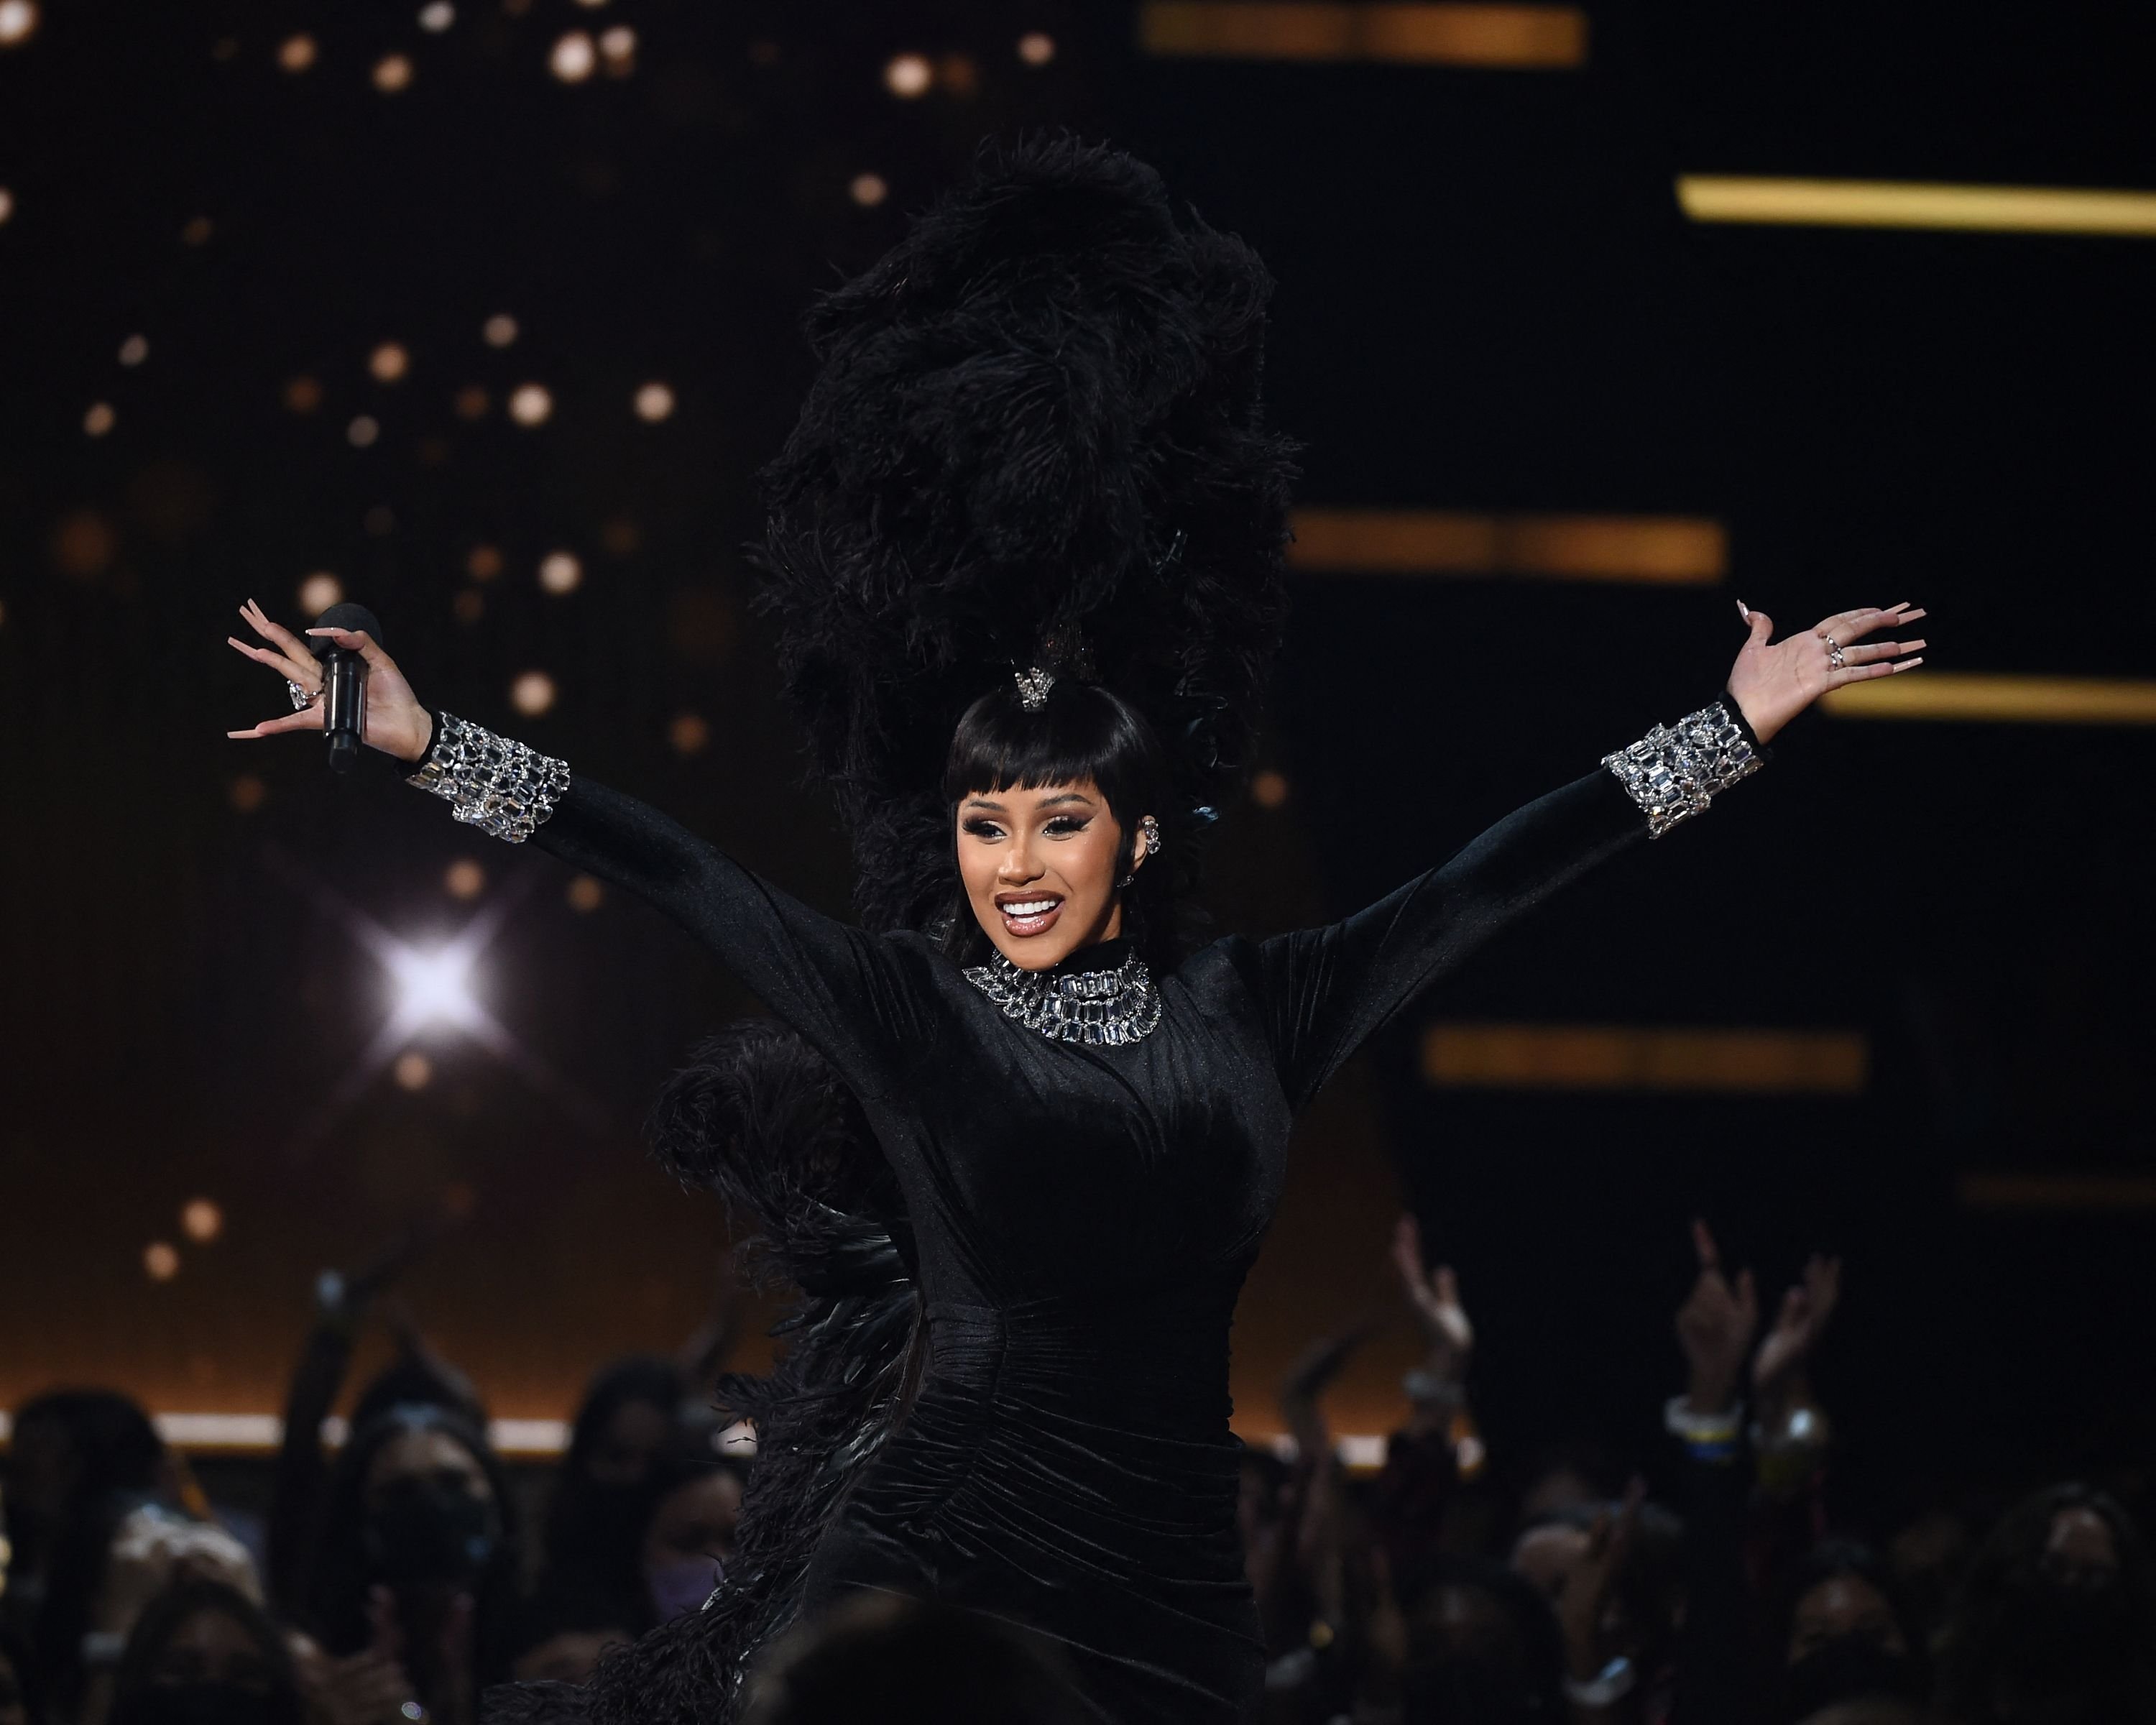 U.S. rapper Cardi B performing onstage during the 2021 American Music Awards at the Microsoft Theater in Los Angeles, U.S., Nov. 21, 2021. (AFP)